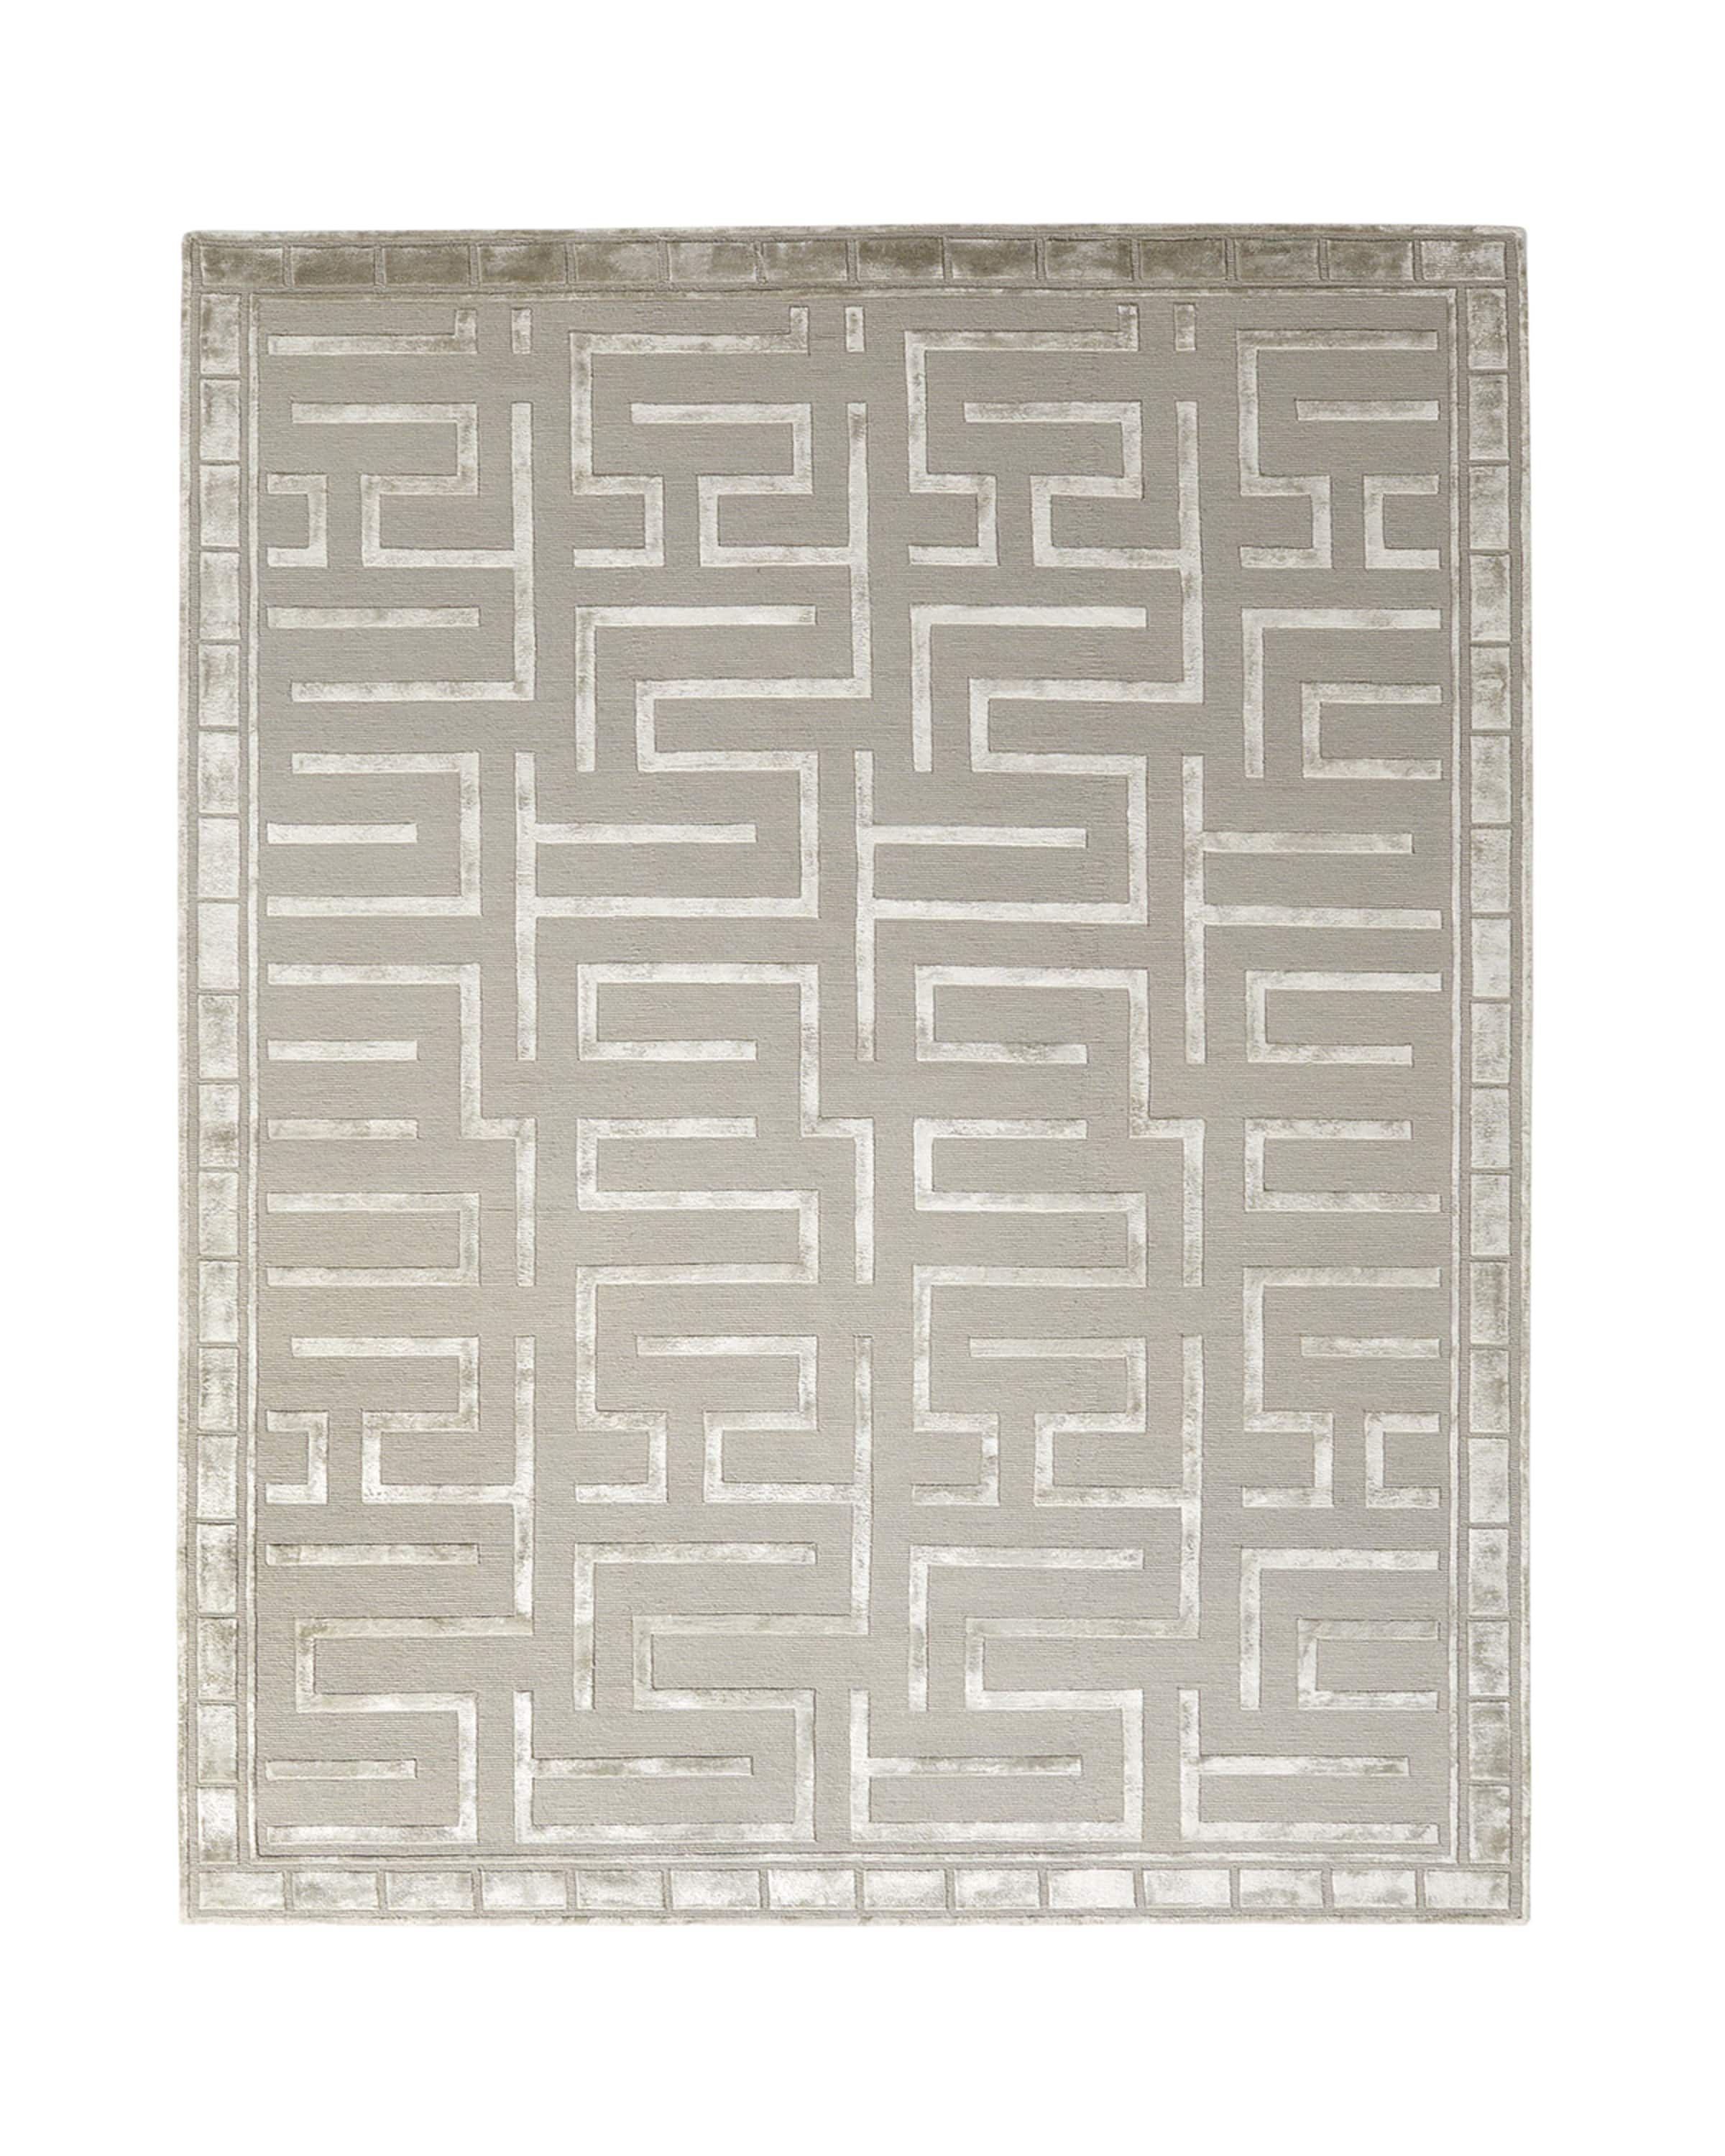 Exquisite Rugs Rowling Maze Hand-Knotted Rug, 9' x 12'